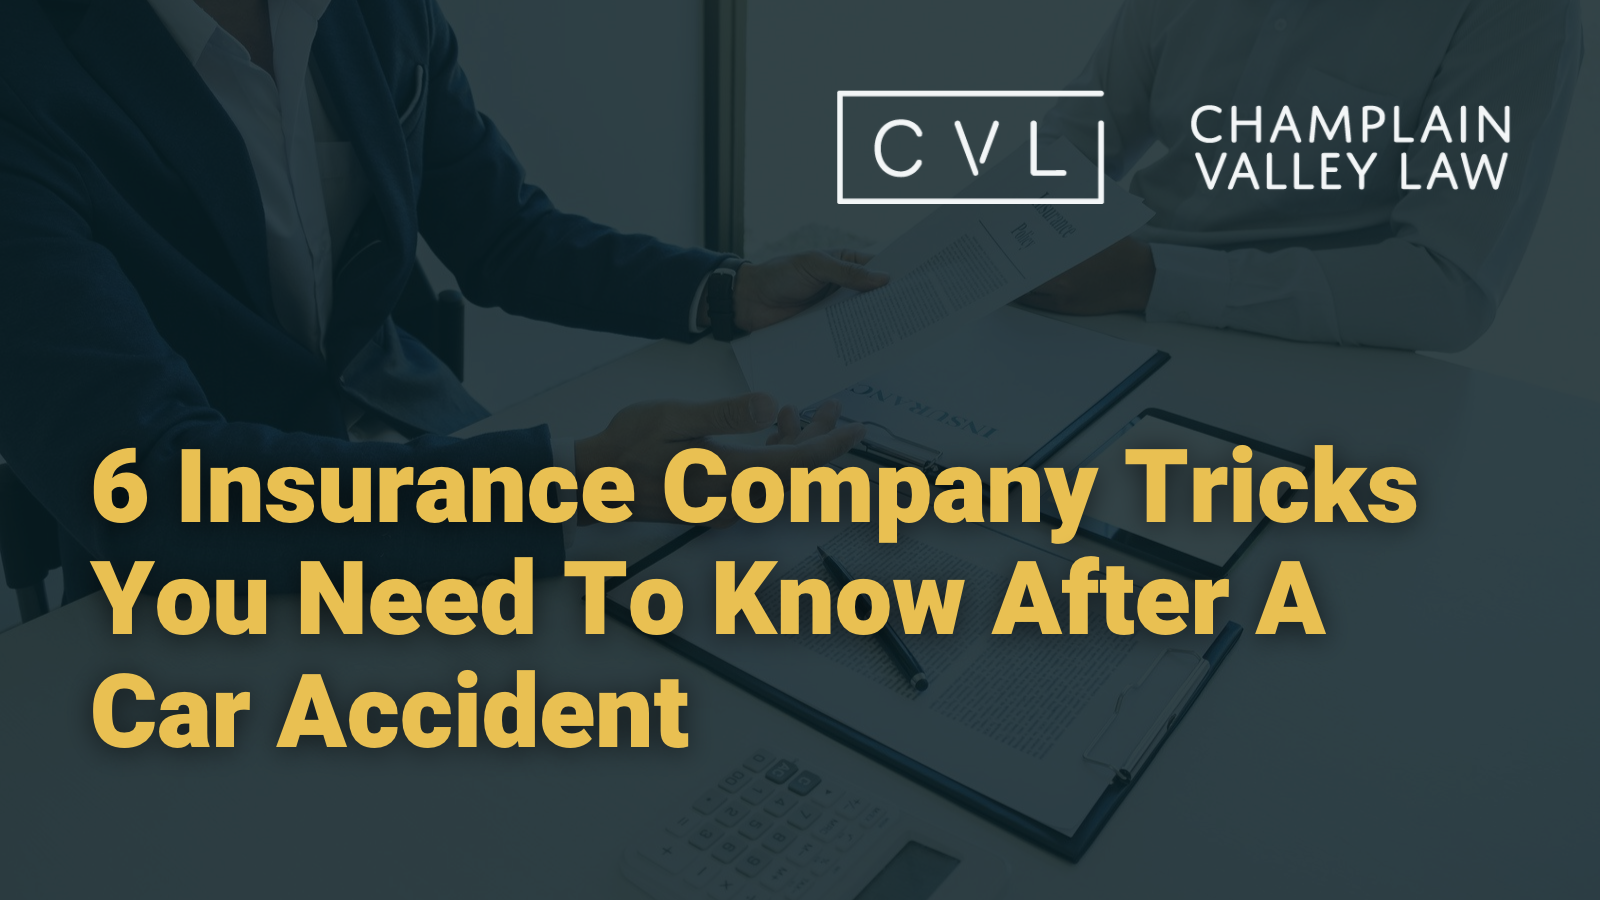 6 Insurance Company Tricks You Need To Know After A Car Accidentin vermont - Champlain Valley Law - Attorney Drew Palcsik